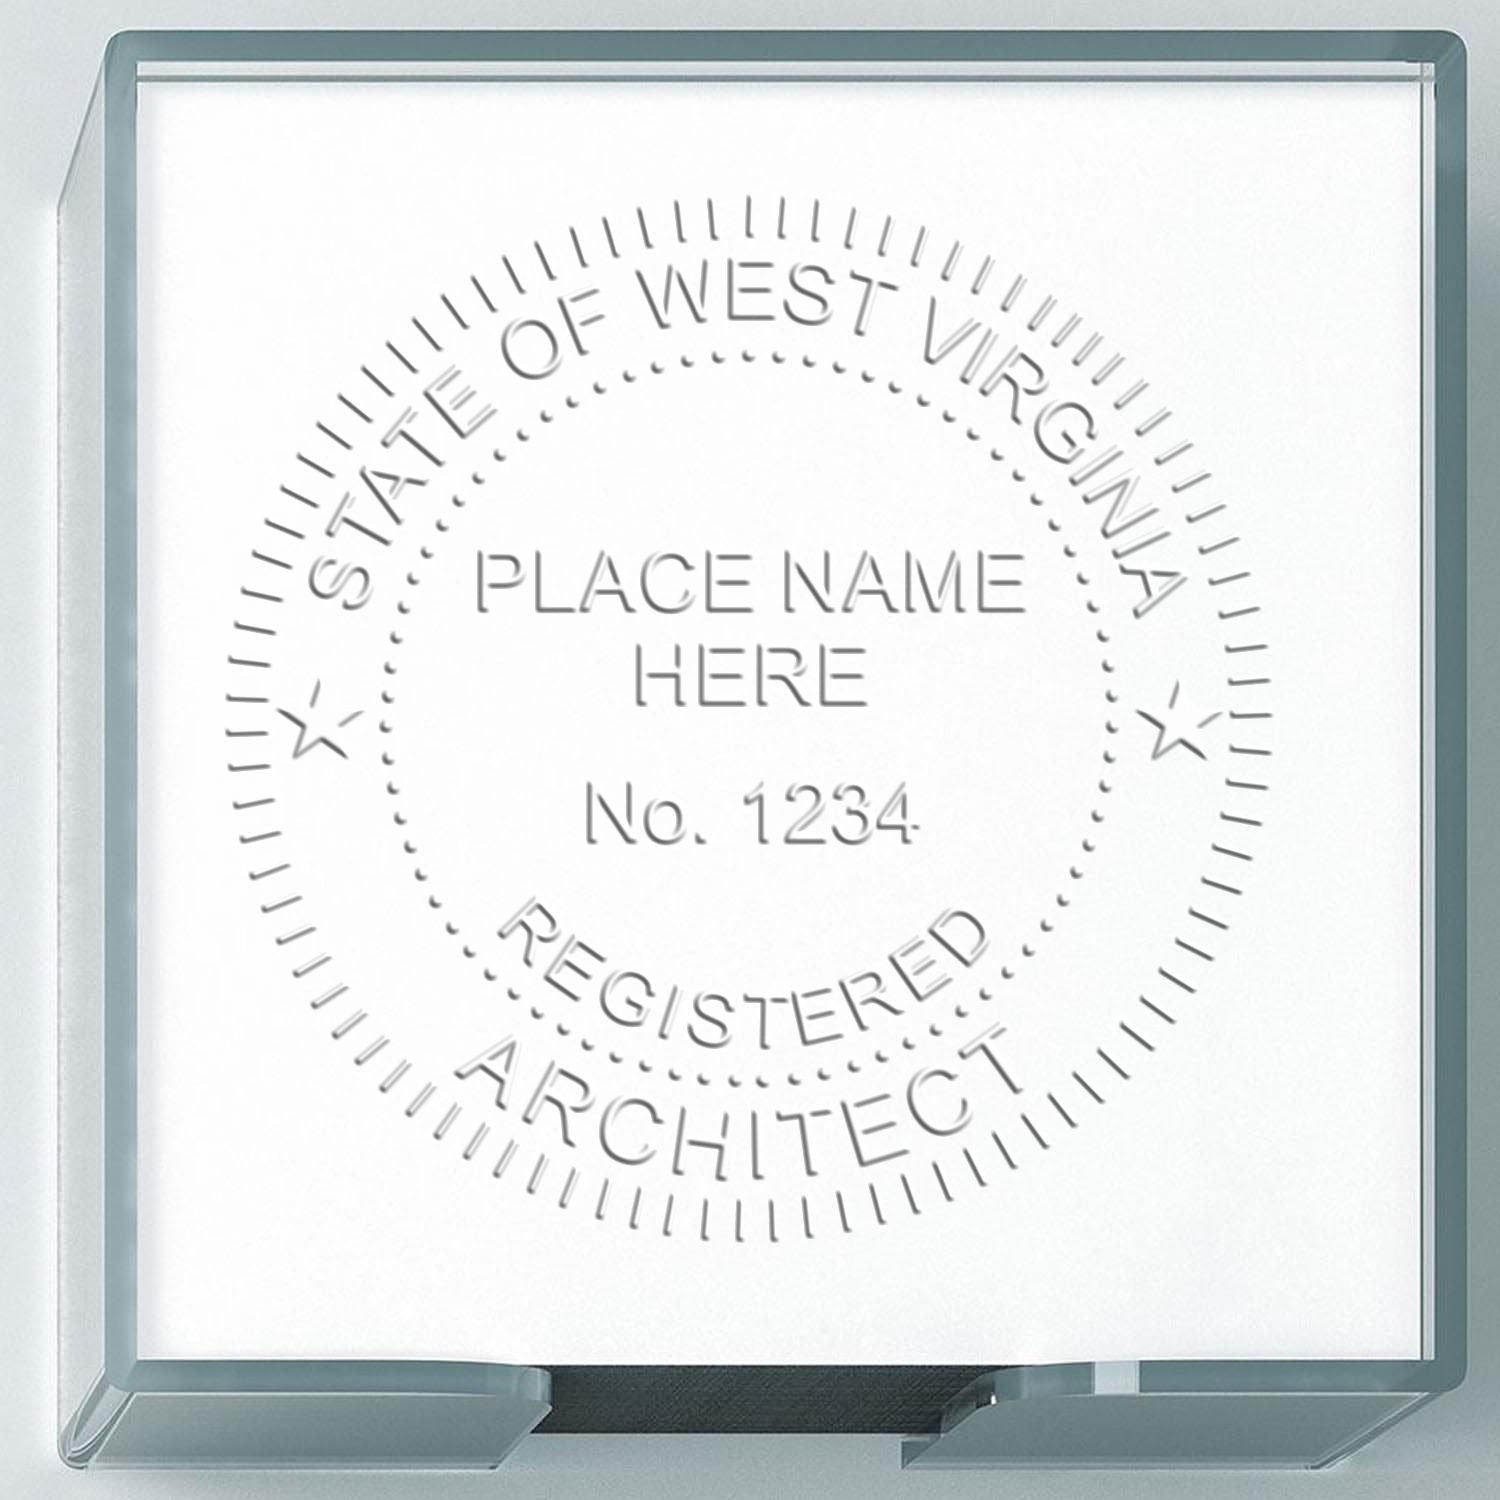 This paper is stamped with a sample imprint of the Extended Long Reach West Virginia Architect Seal Embosser, signifying its quality and reliability.